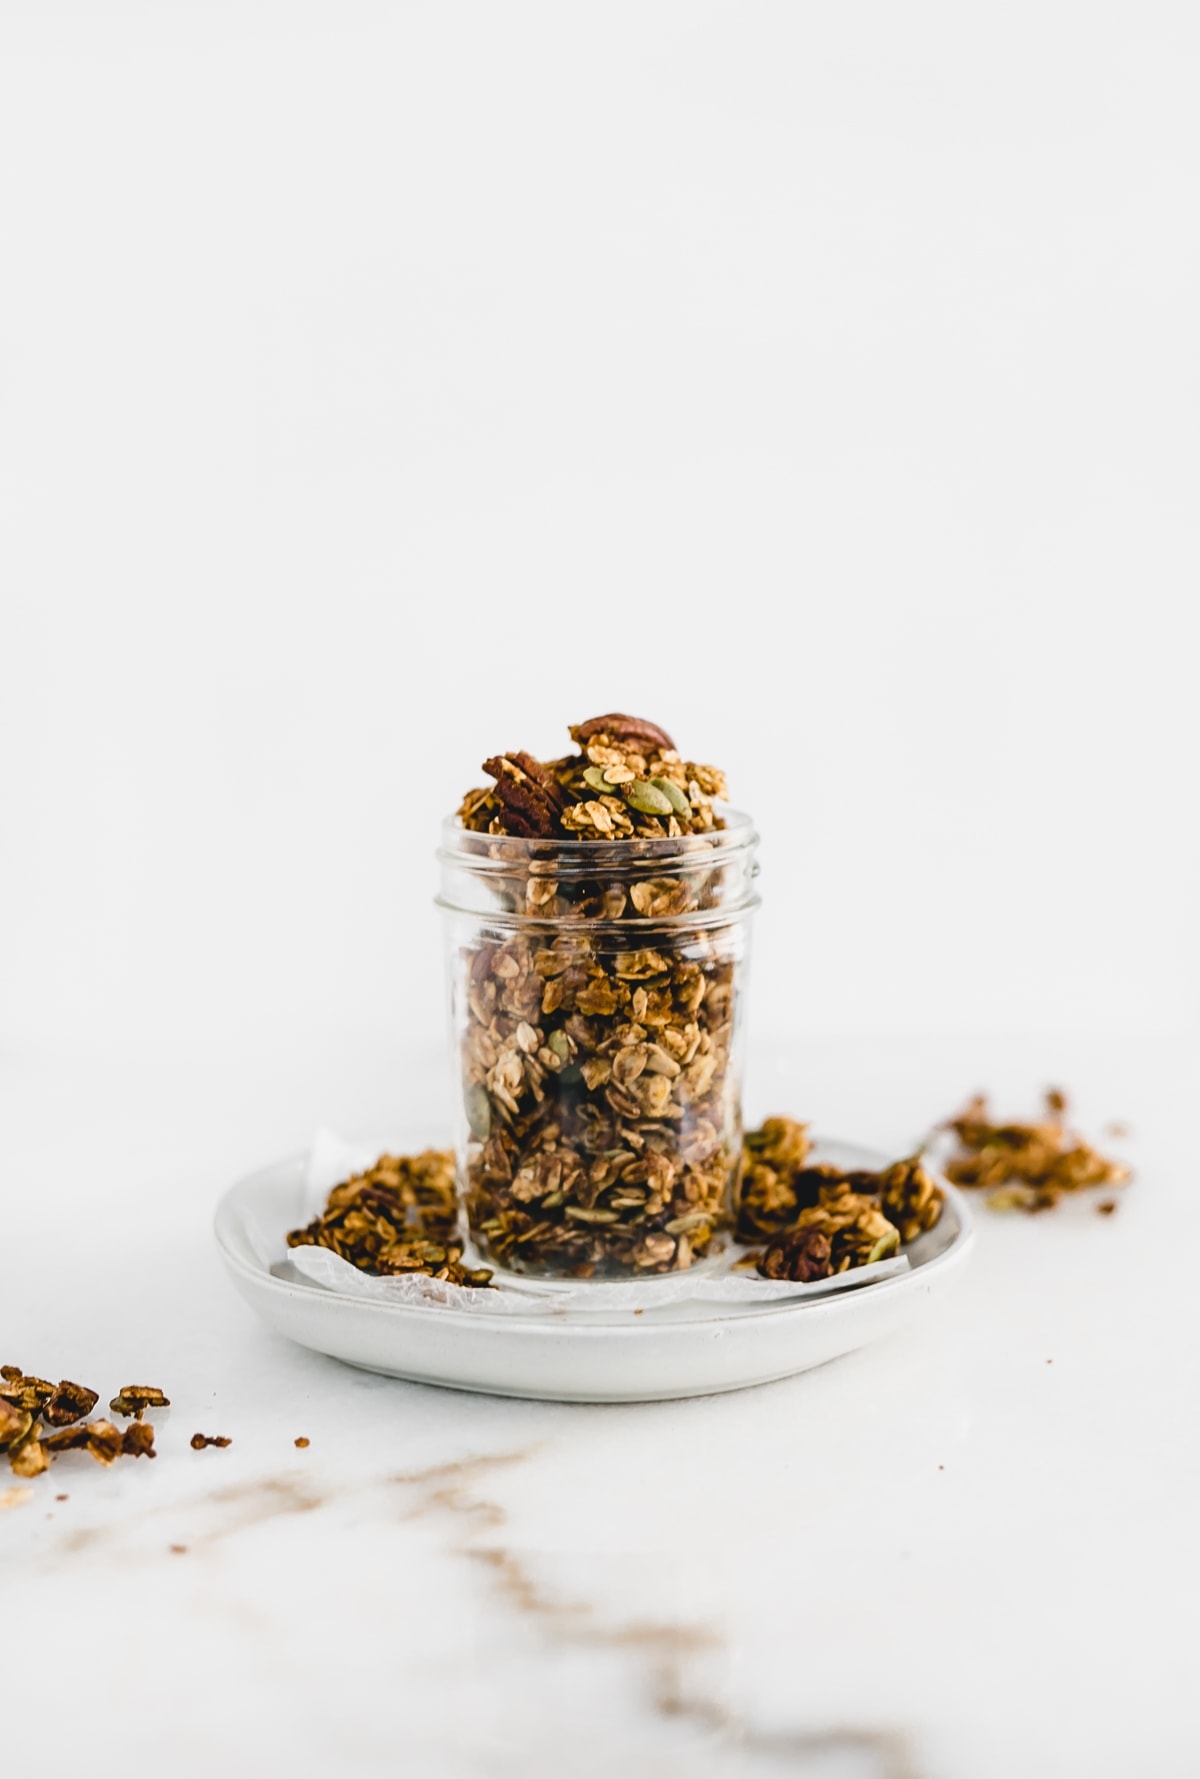 Healthy Spiced Pumpkin Granola is the perfect fall snack or breakfast! (gluten-free, vegan, refined sugar-free) 